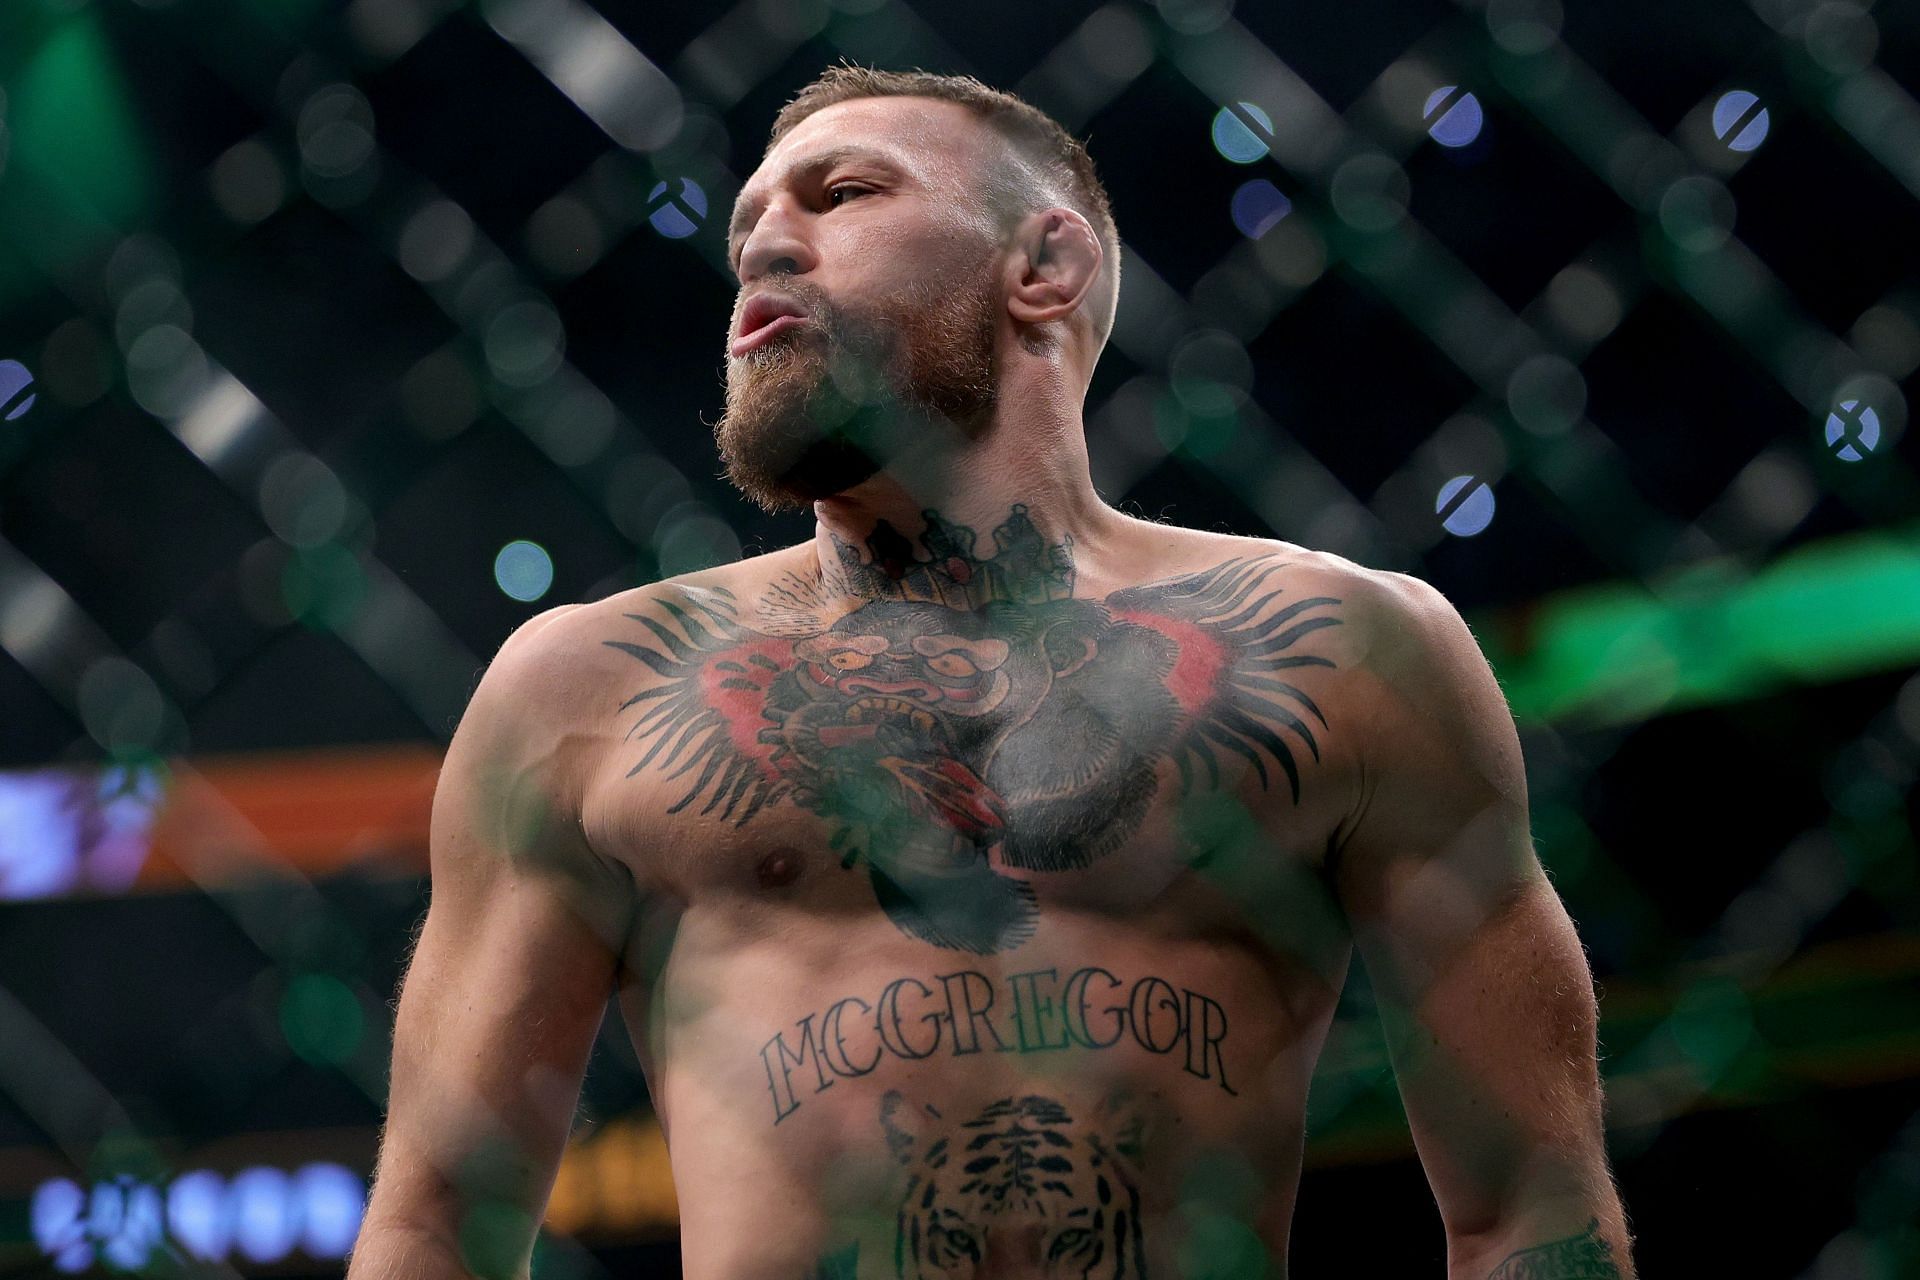 Could this be the next chapter in the McGregor-Khabib rivalry?